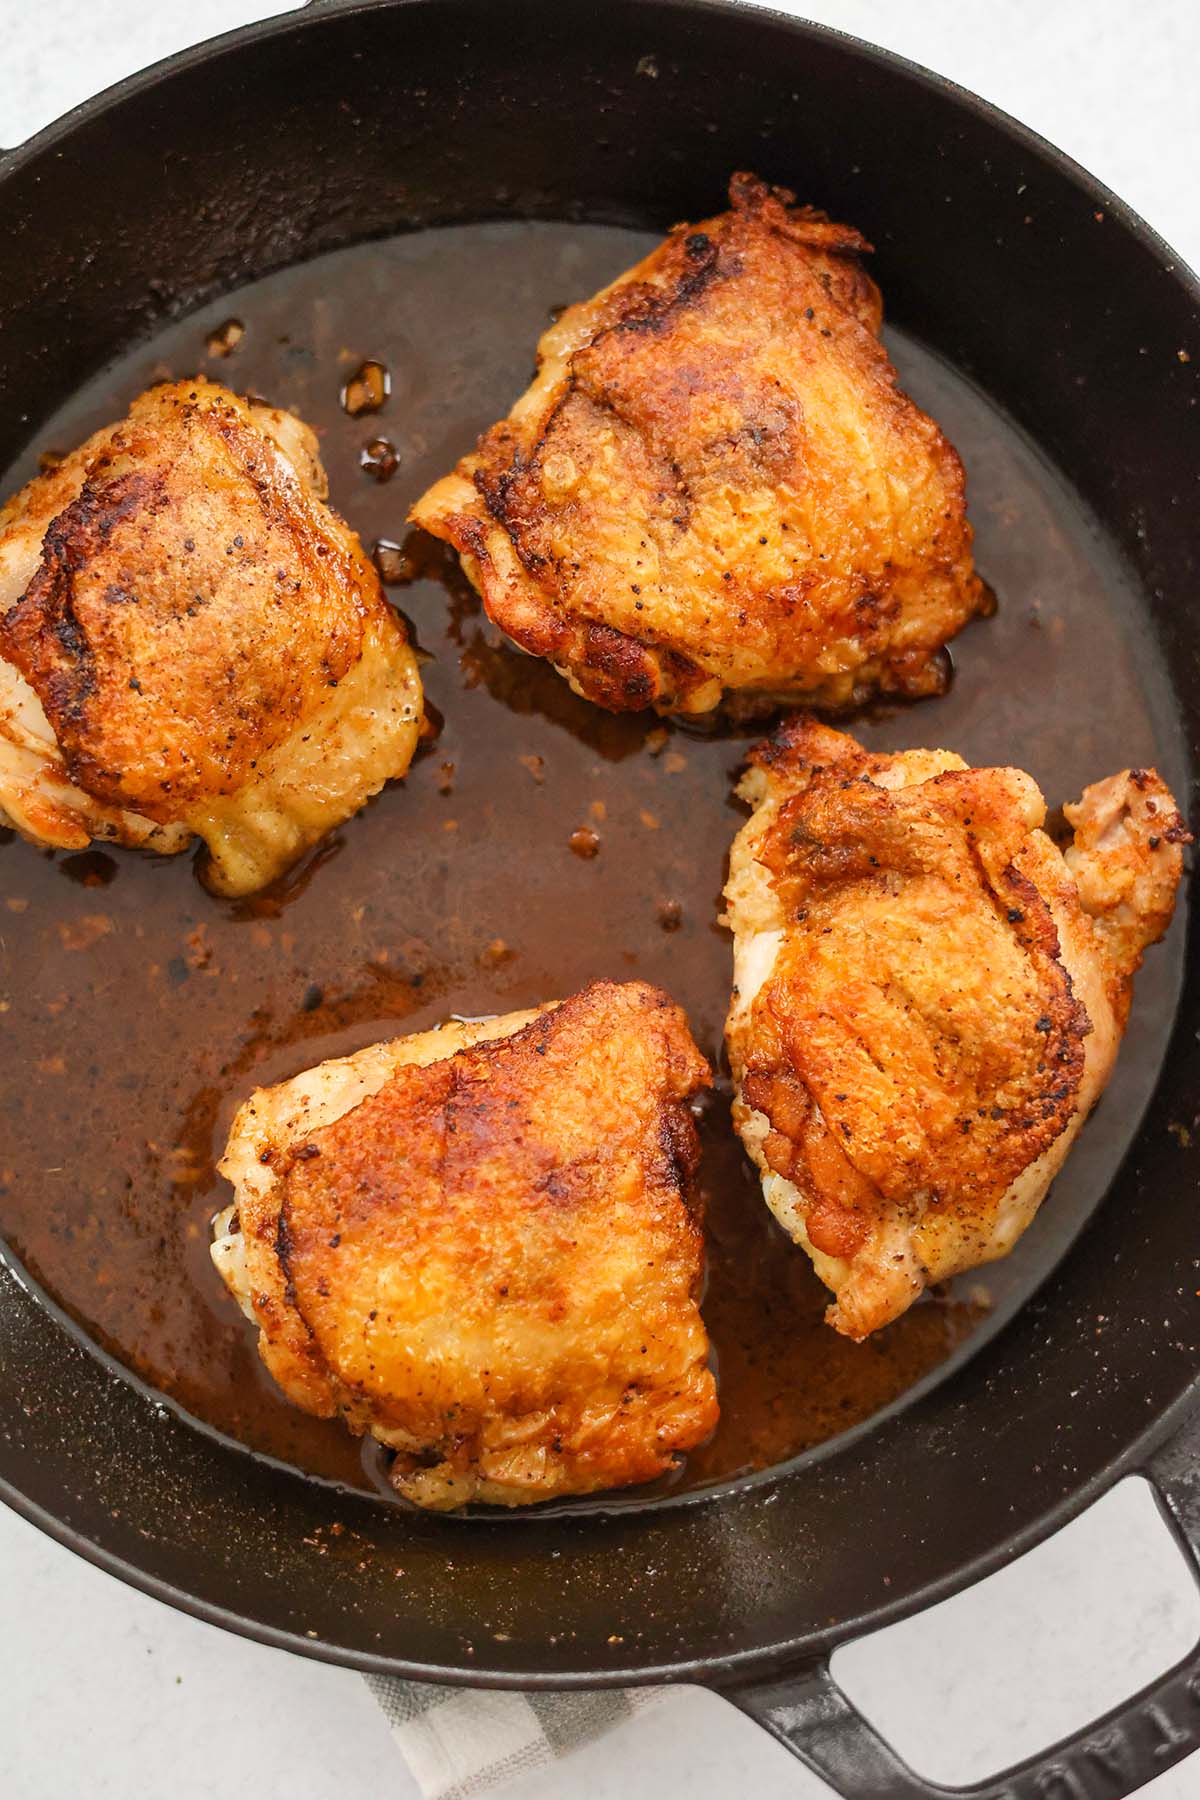 How Long To Cook Chicken Thighs In Electric Skillet